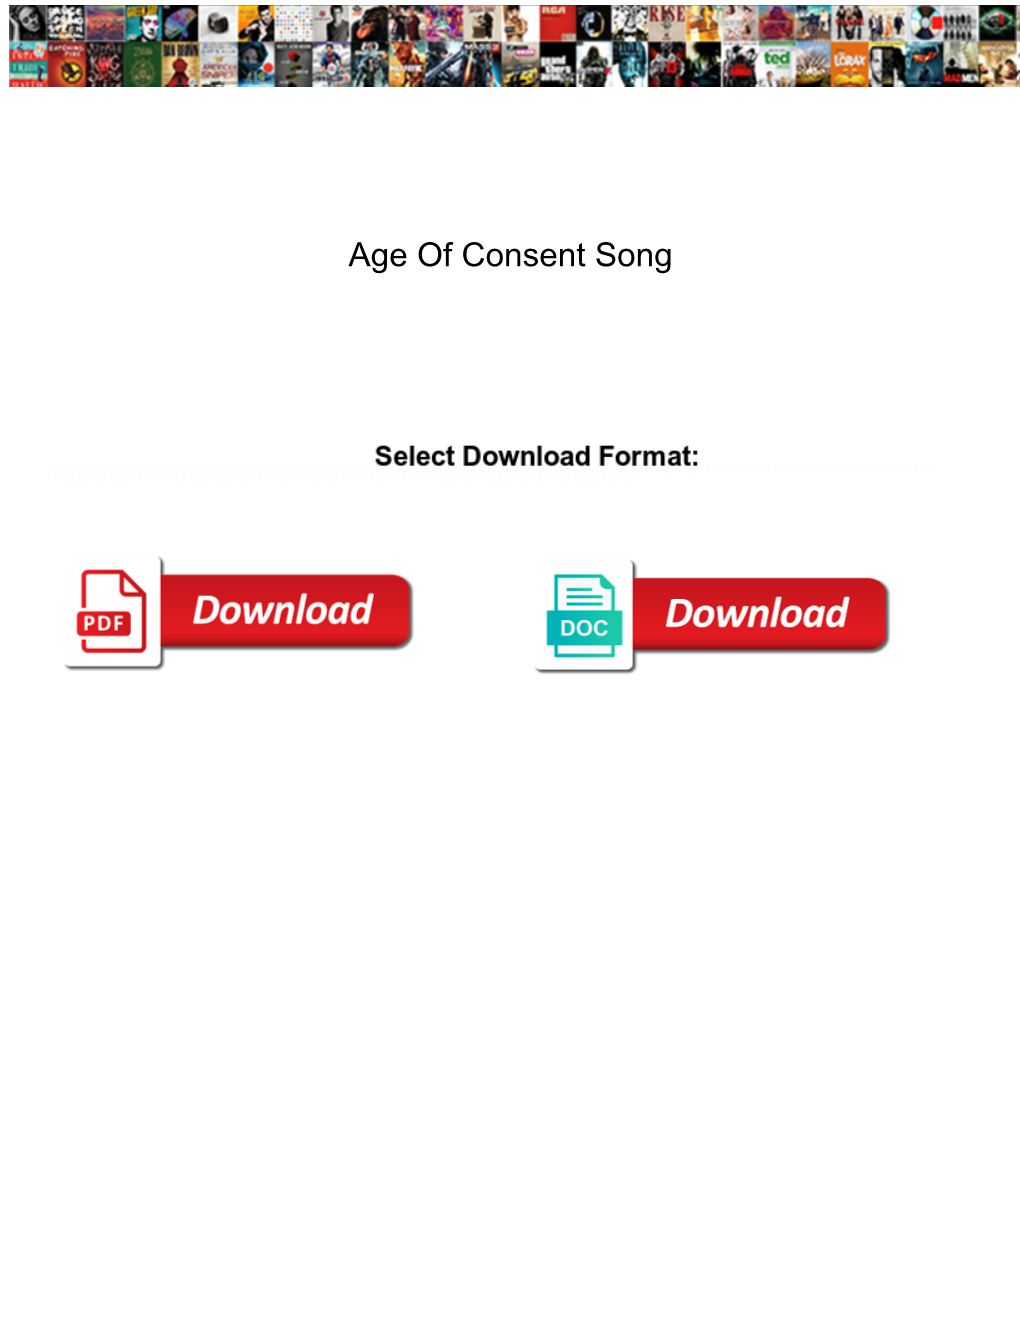 Age of Consent Song